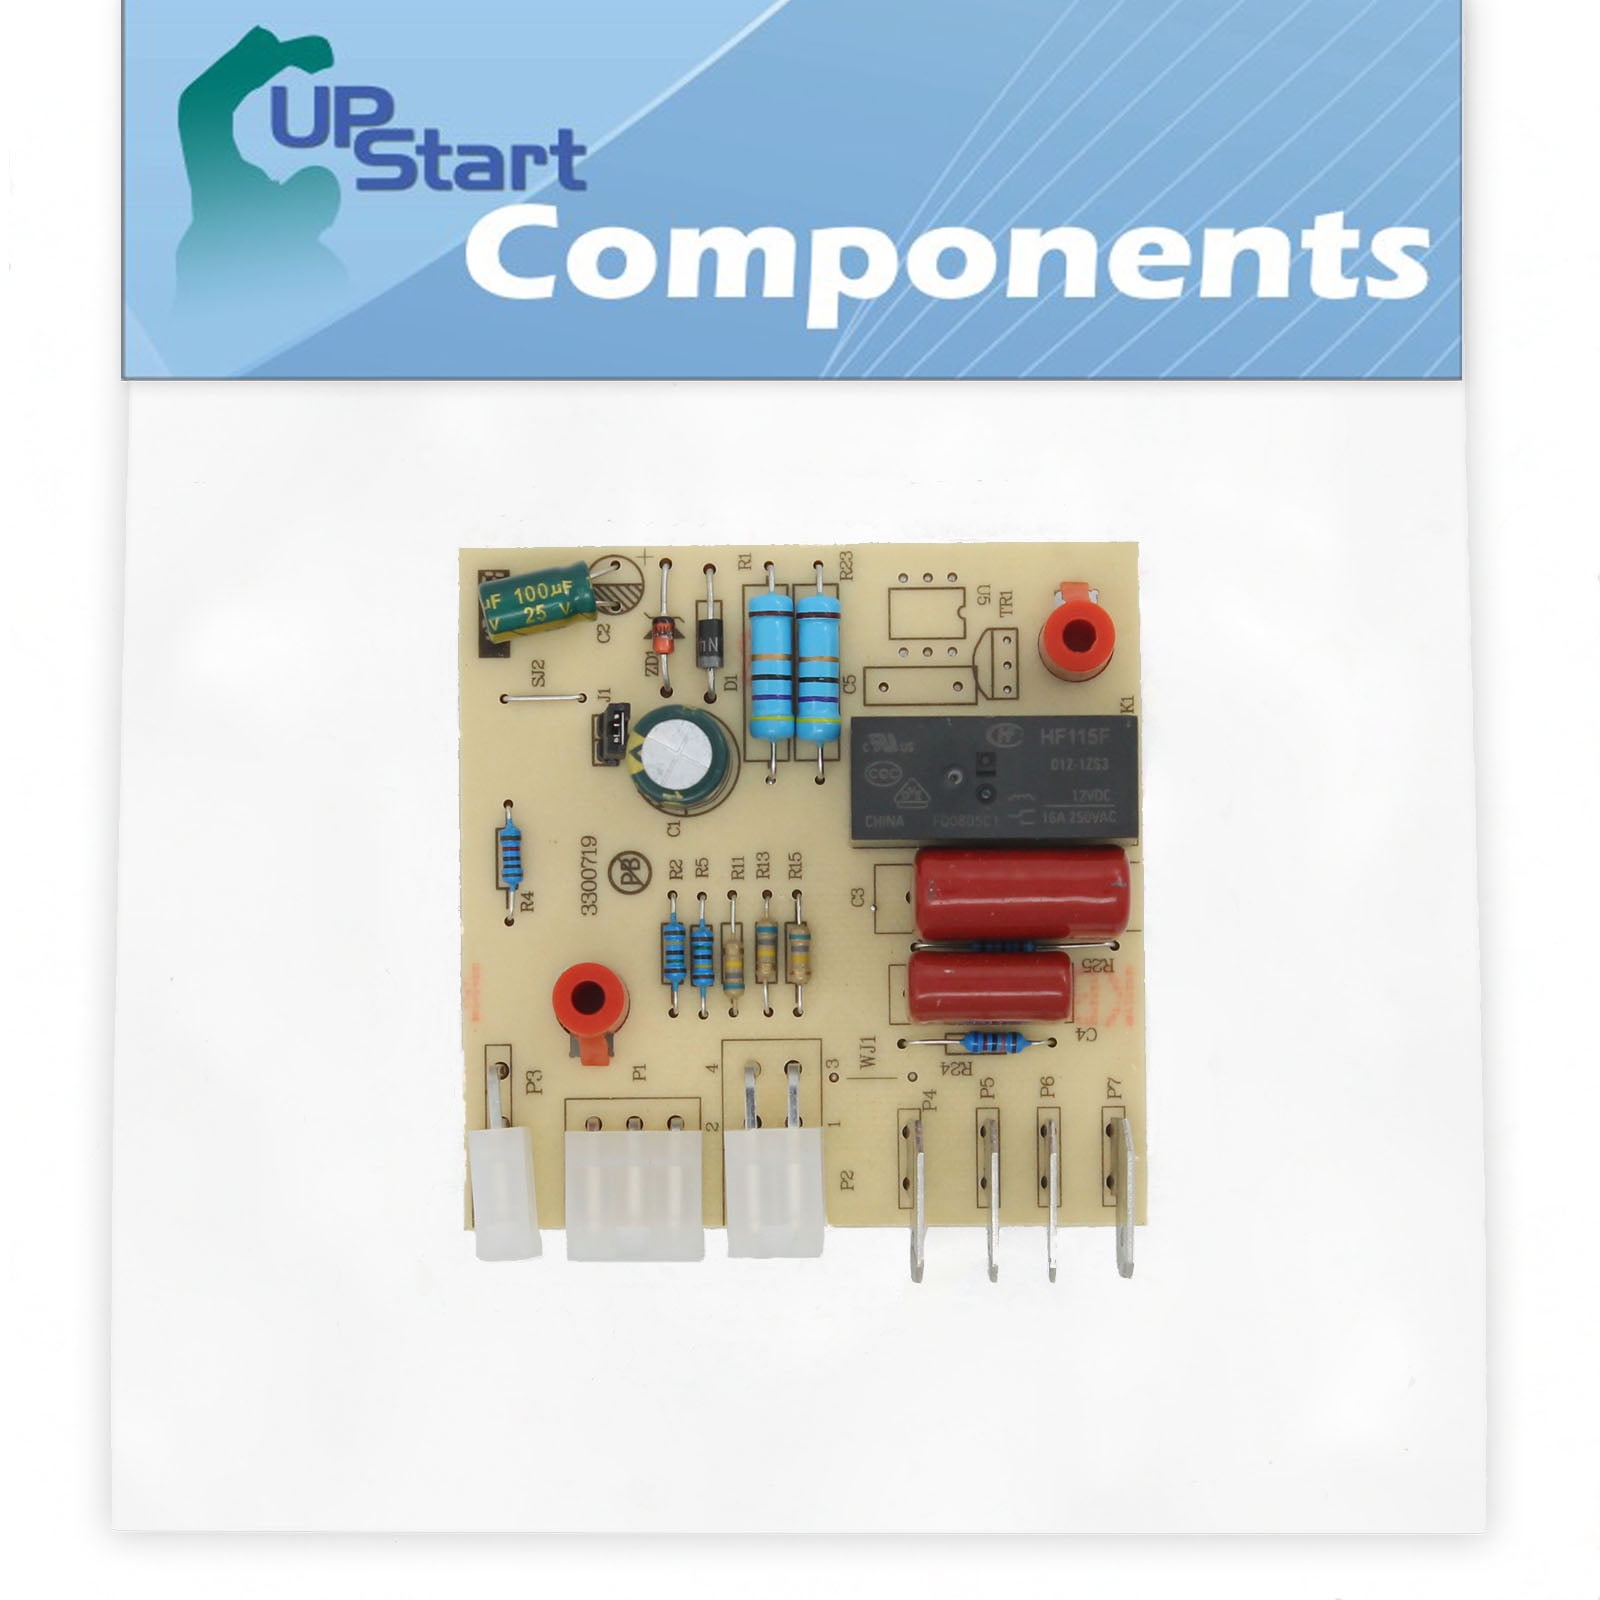 UpStart Components Brand Compatible with WPW10366605 Control Board W10366605 Defrost Control Board Replacement for Maytag MSD2542VEW00 Refrigerator 